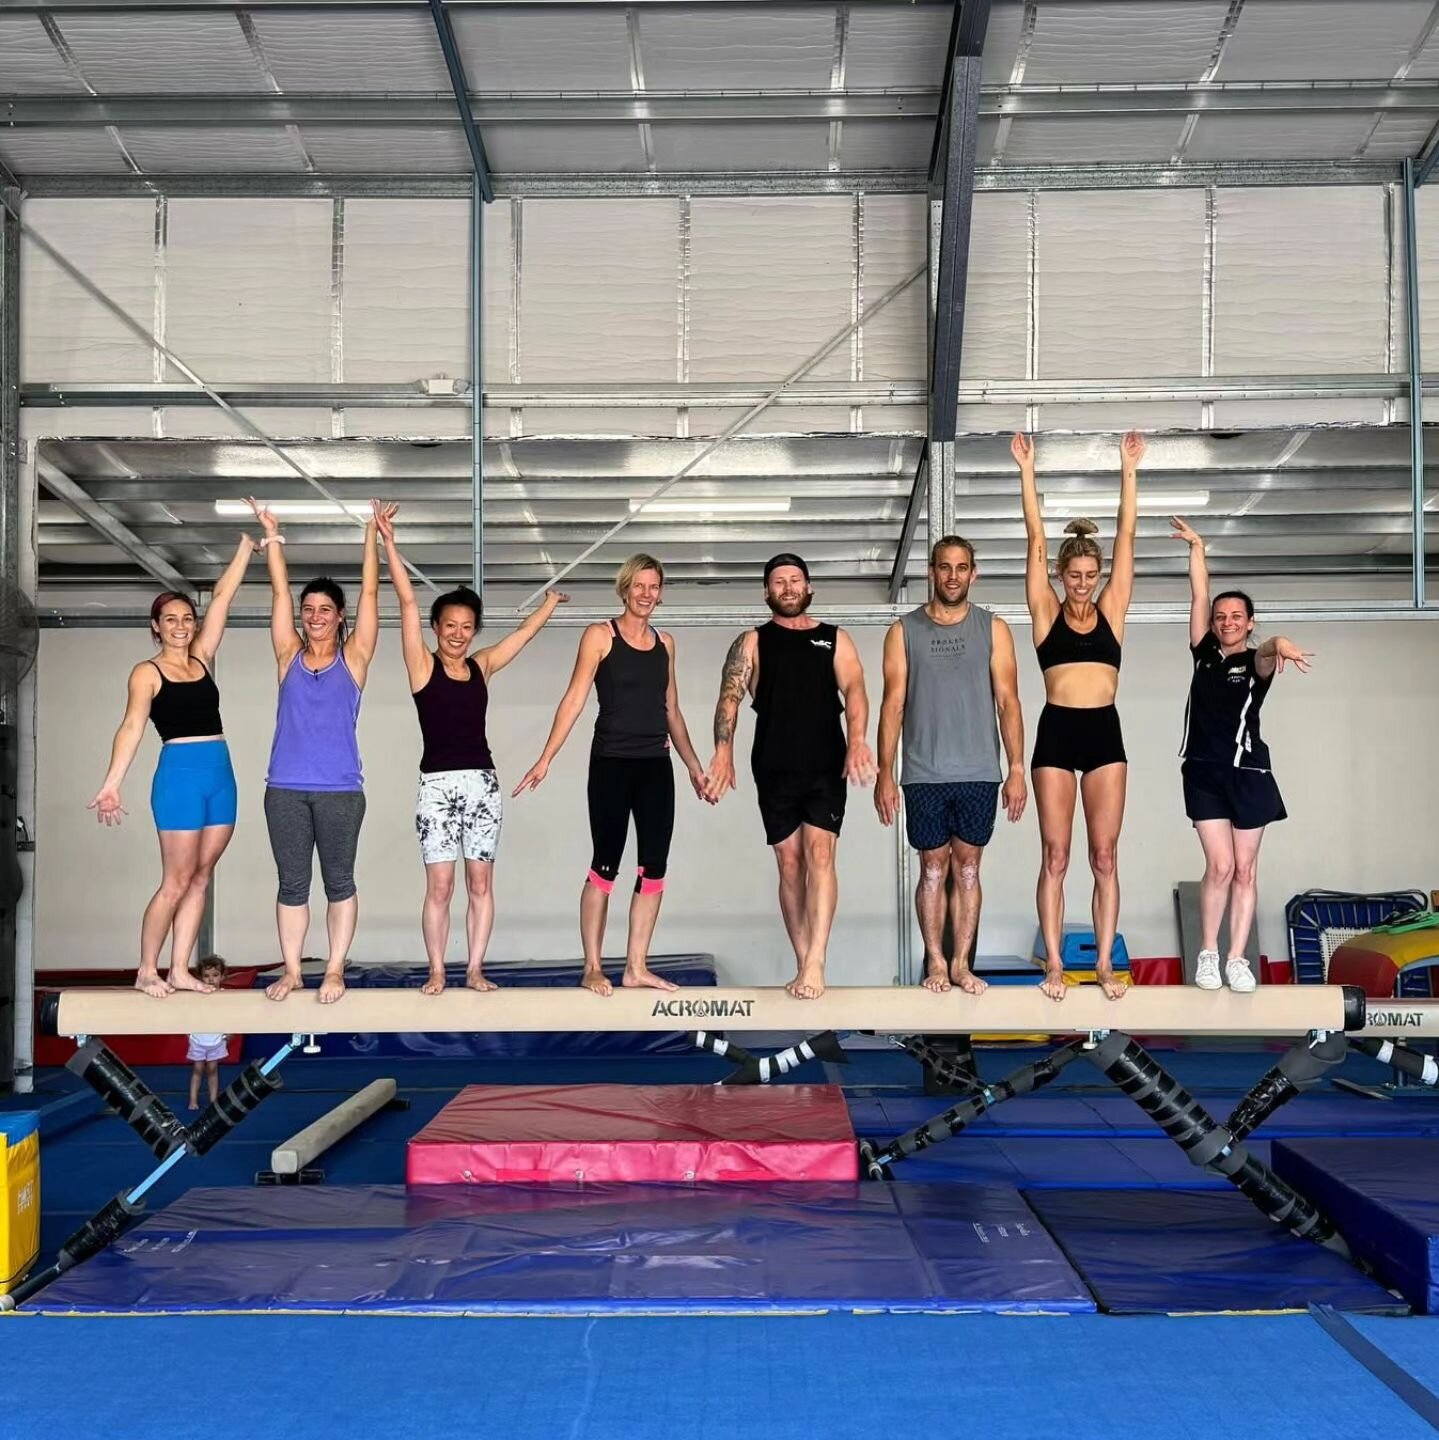 Gymnastics isn't just for kids!

Did you know we run an Adults Open class? Whether you're an ex gymnast or have always just wanted to give it a go, this is the class for you!

Come and join the fun!

Sunday, 7 April
10am - 11:30am
No experience neces